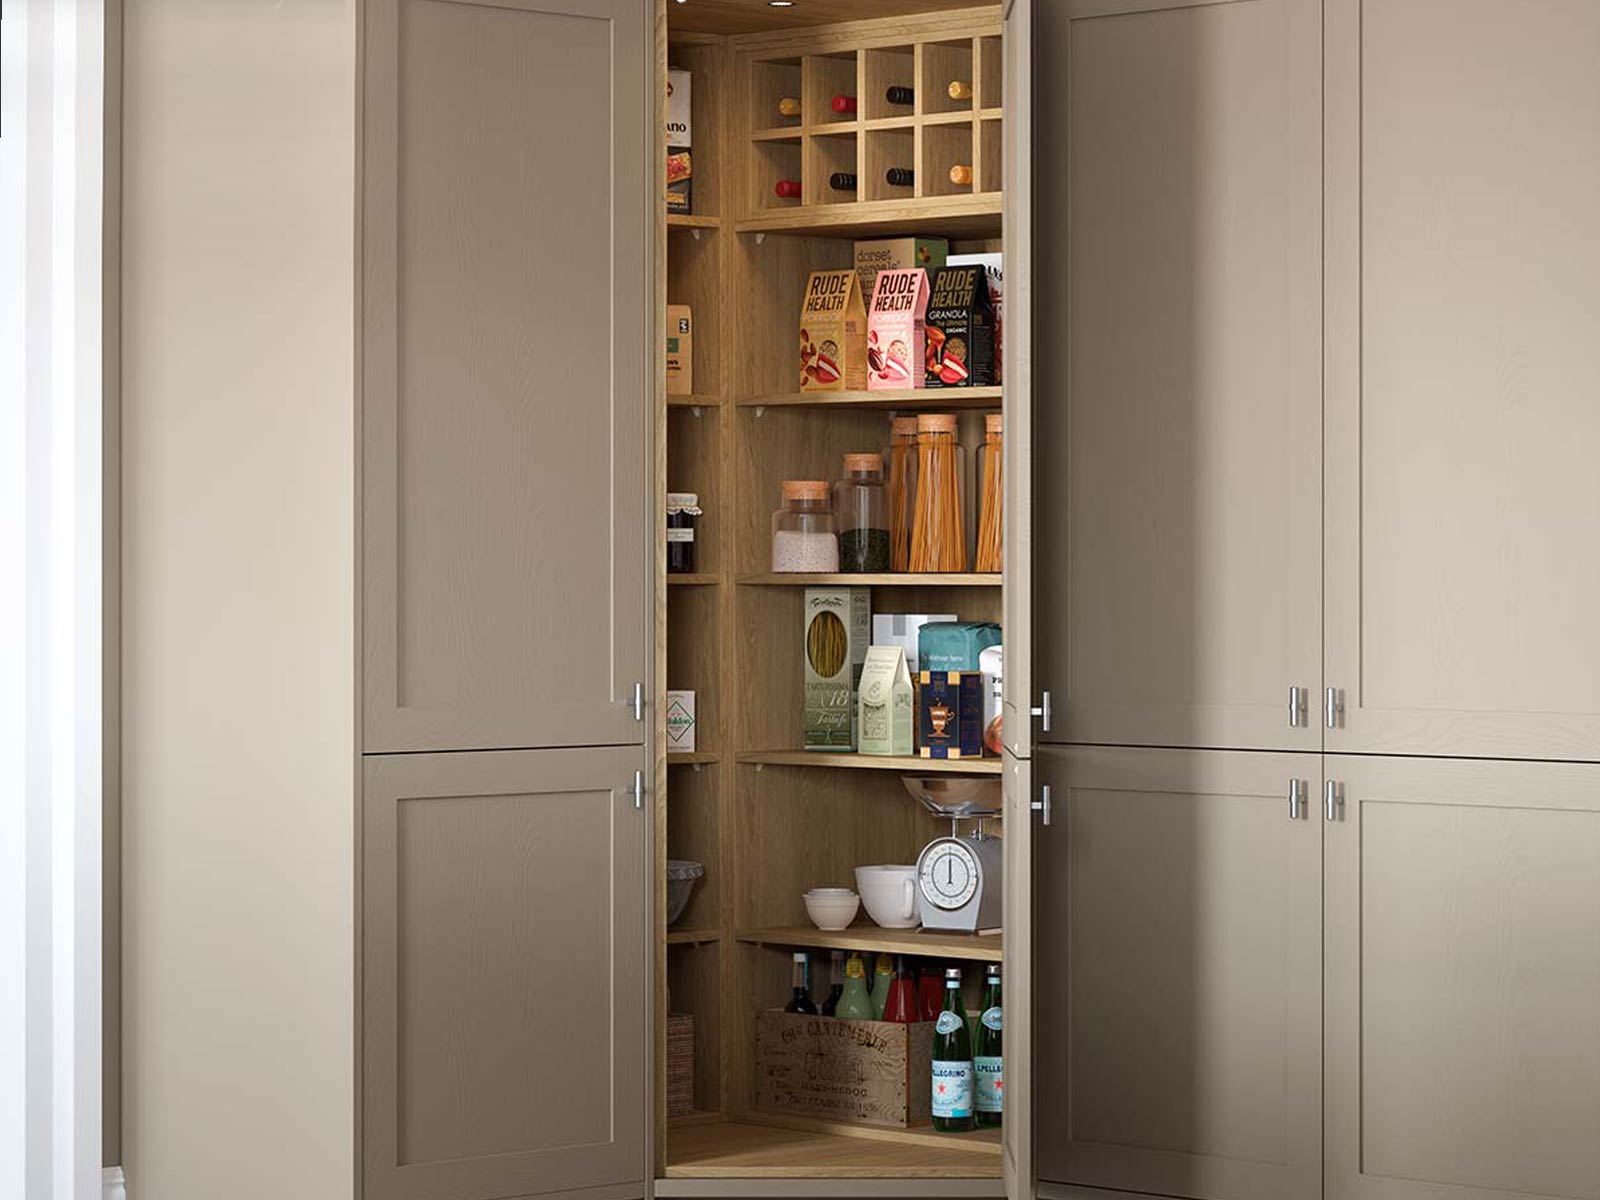 A corner kitchen pantry for food